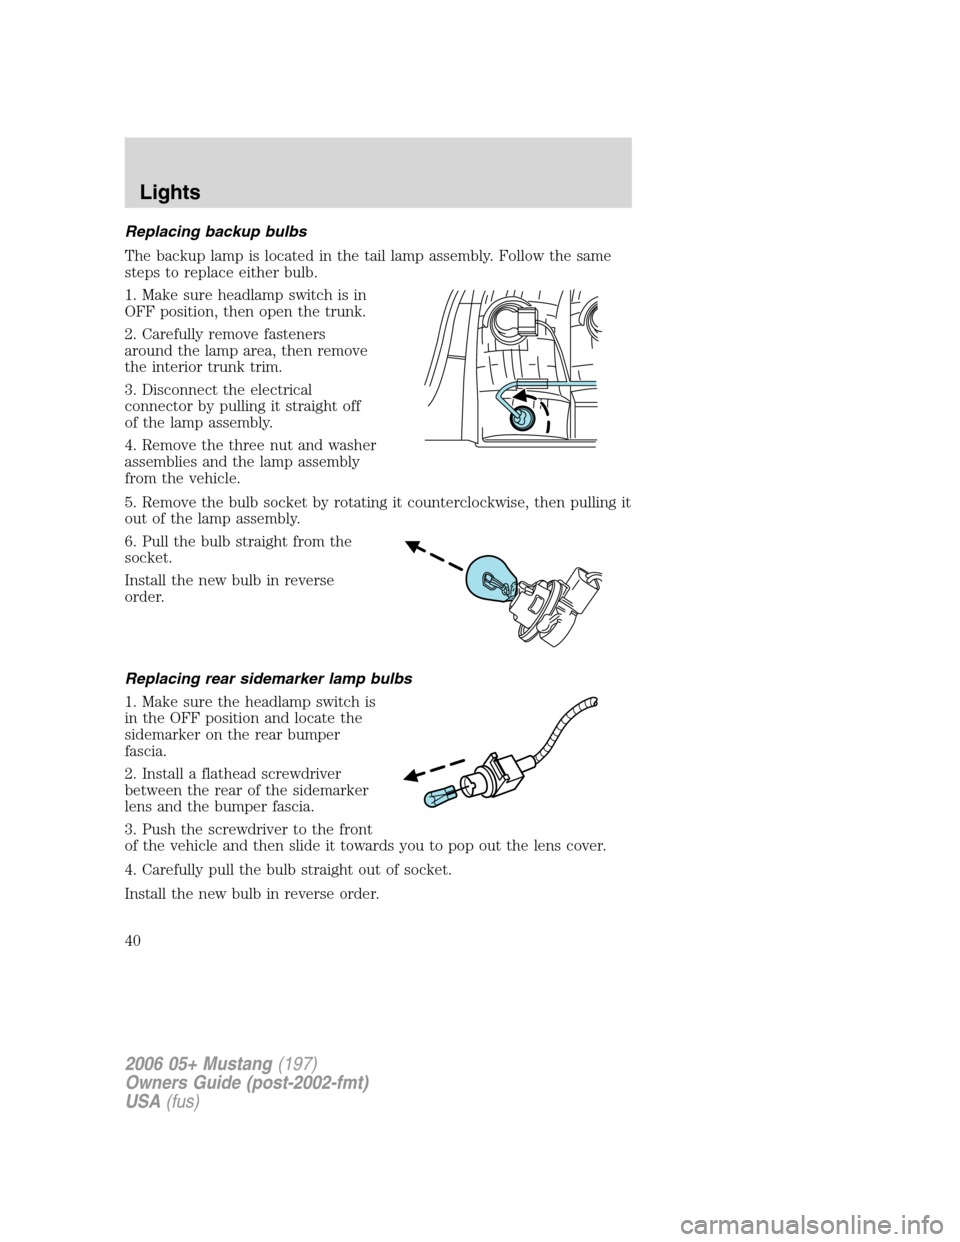 FORD MUSTANG 2006 5.G Owners Guide Replacing backup bulbs
The backup lamp is located in the tail lamp assembly. Follow the same
steps to replace either bulb.
1. Make sure headlamp switch is in
OFF position, then open the trunk.
2. Care